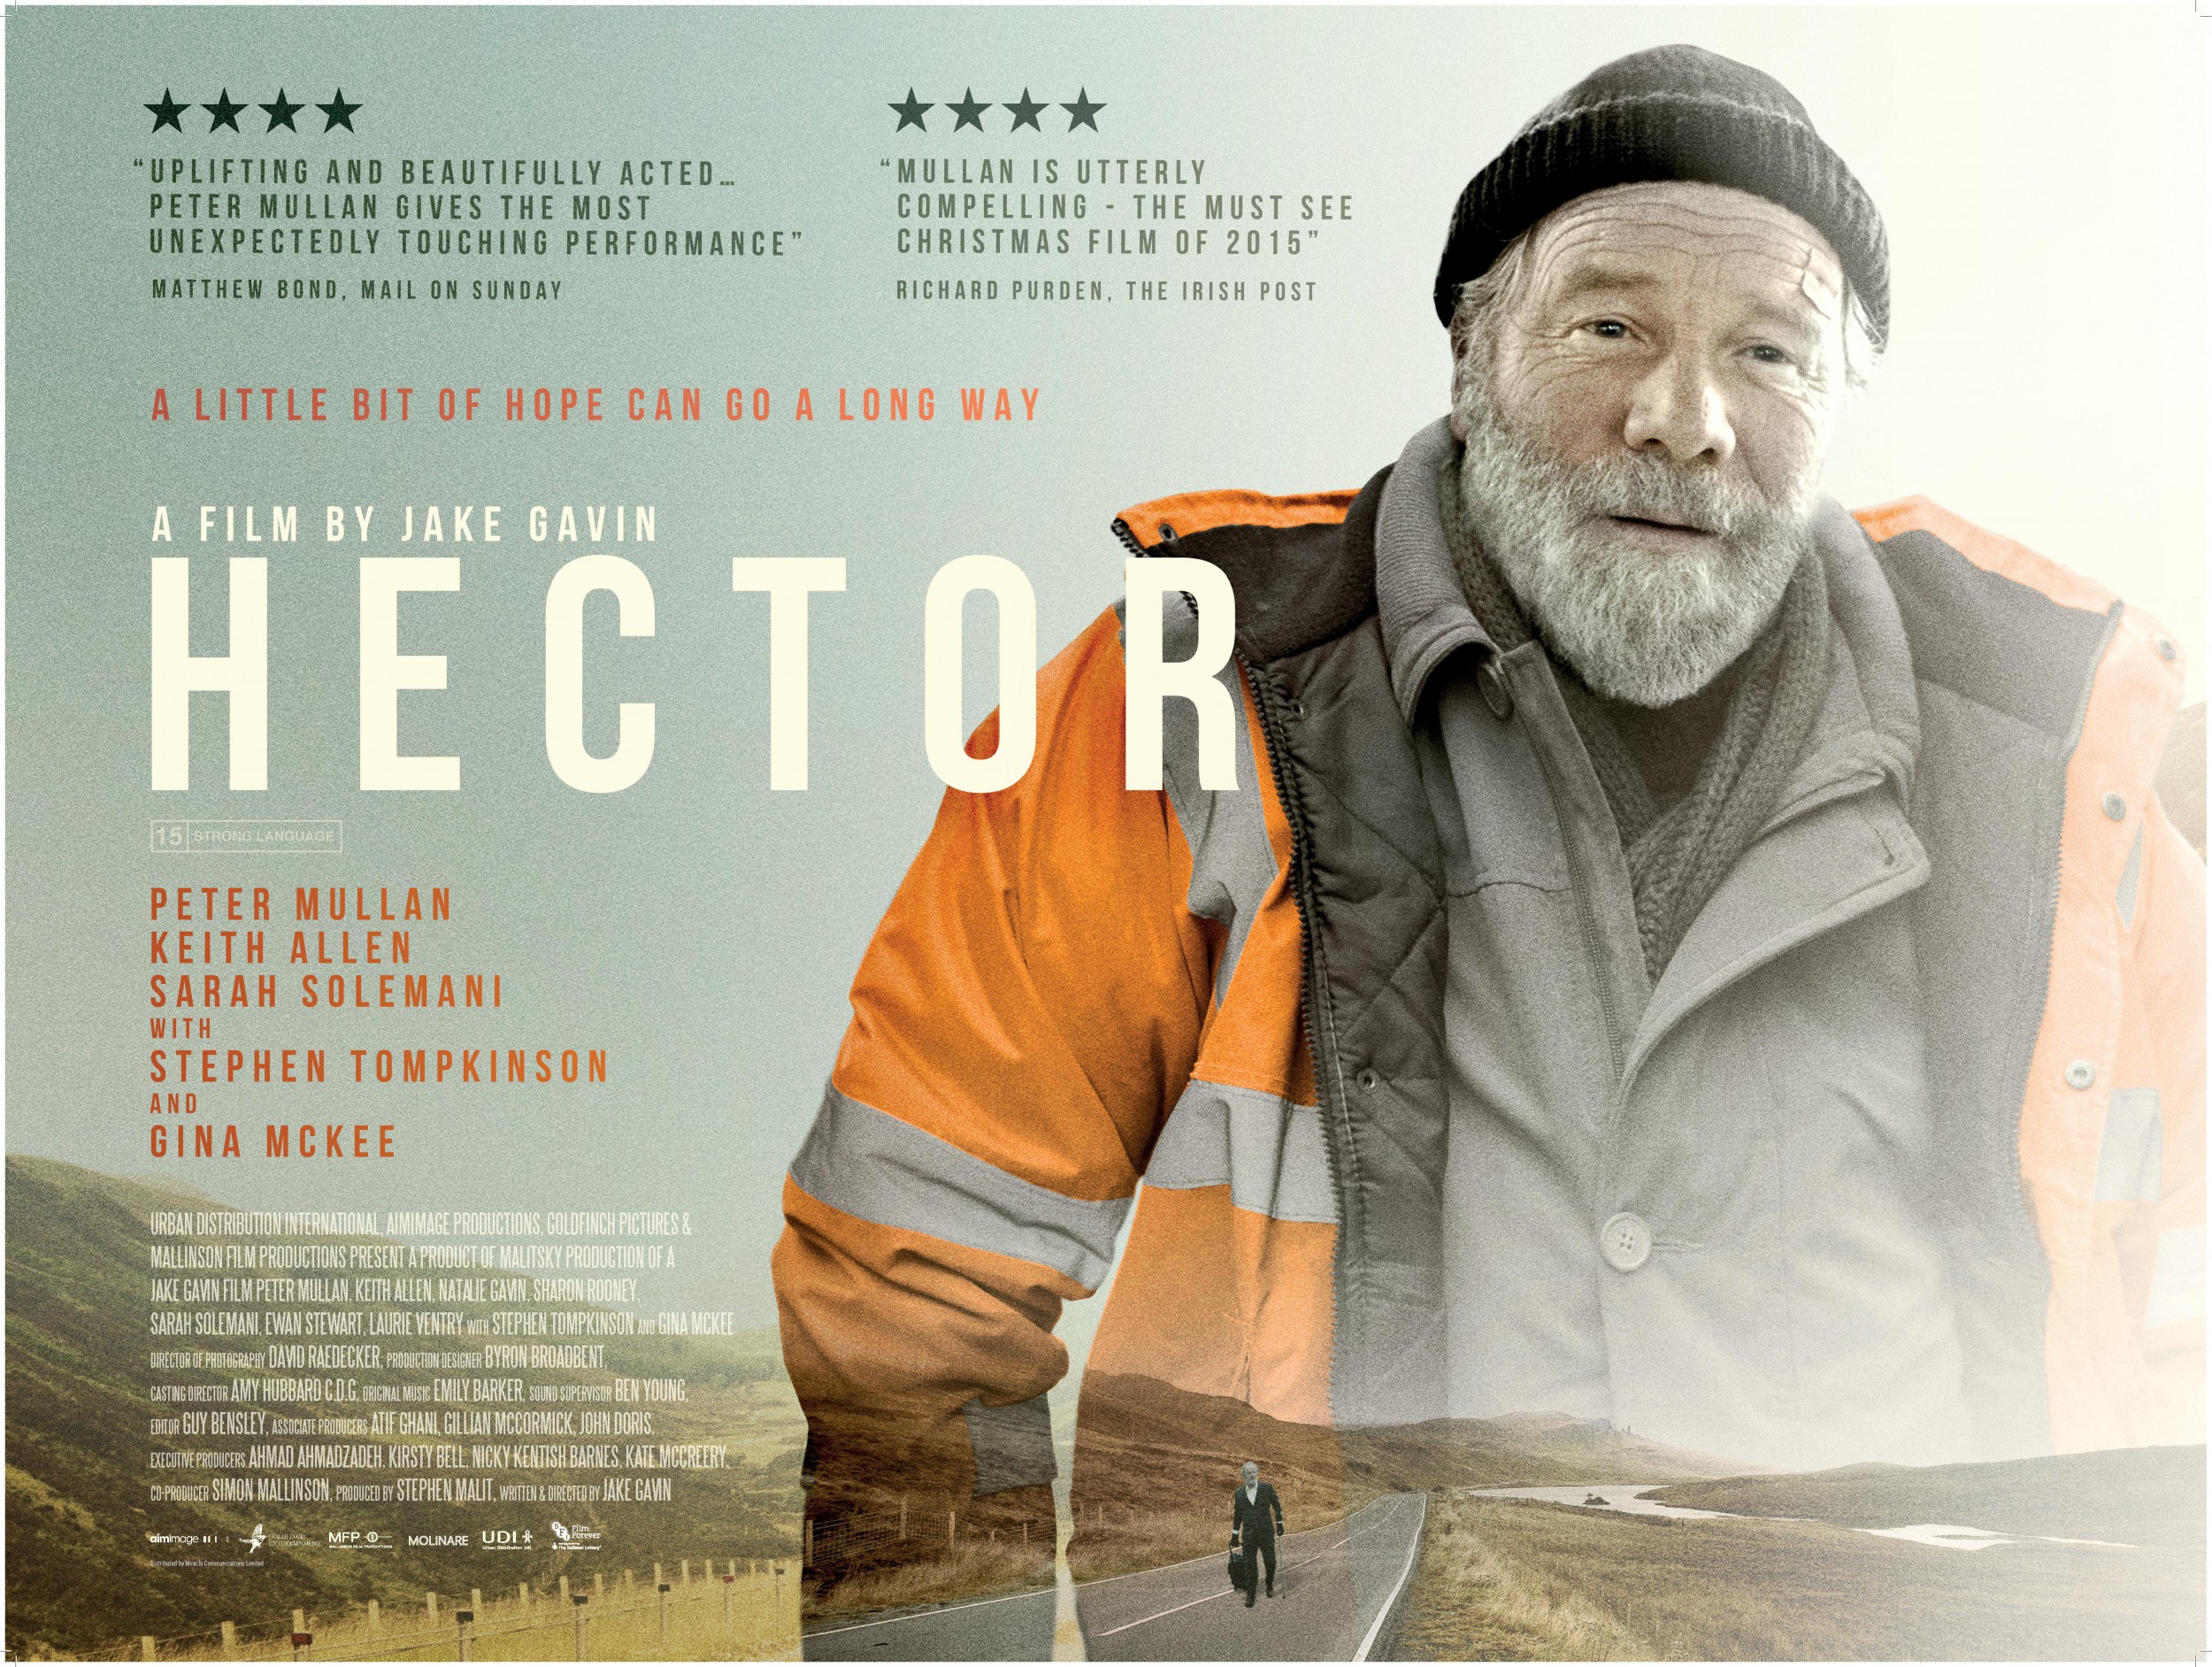 Mega Sized Movie Poster Image for Hector 